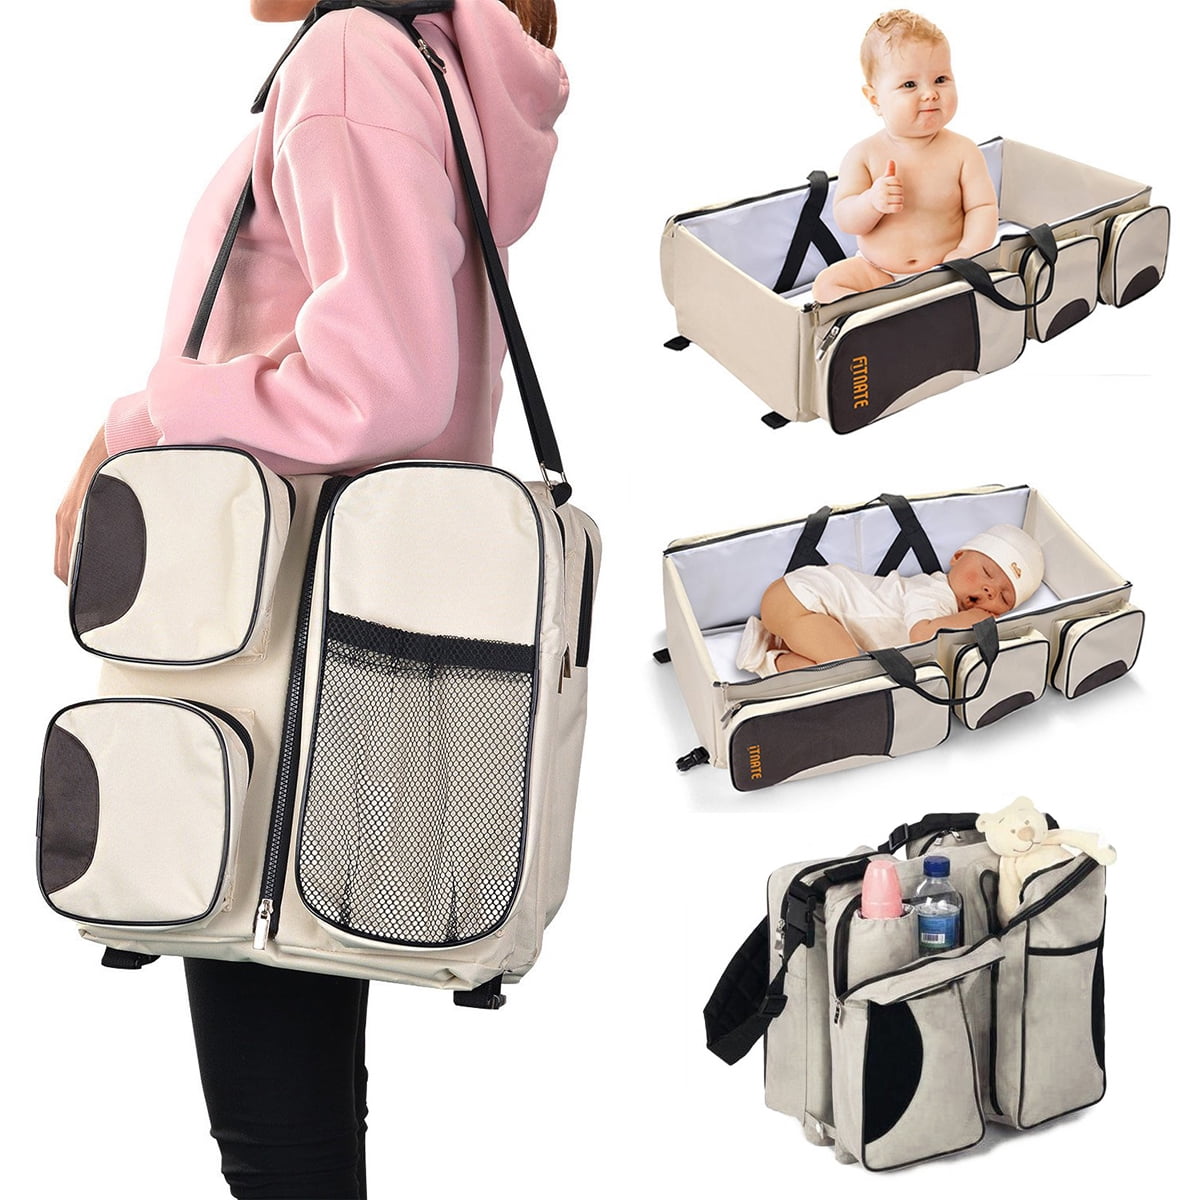 Baby Nest with Mattress Travel Crib Infant Sleeper Portable Bassinets for Baby and Toddler Portable Diaper Changing Station Mummy Bag Backpack 3 in 1 Travel Bassinet Foldable Baby Bed 